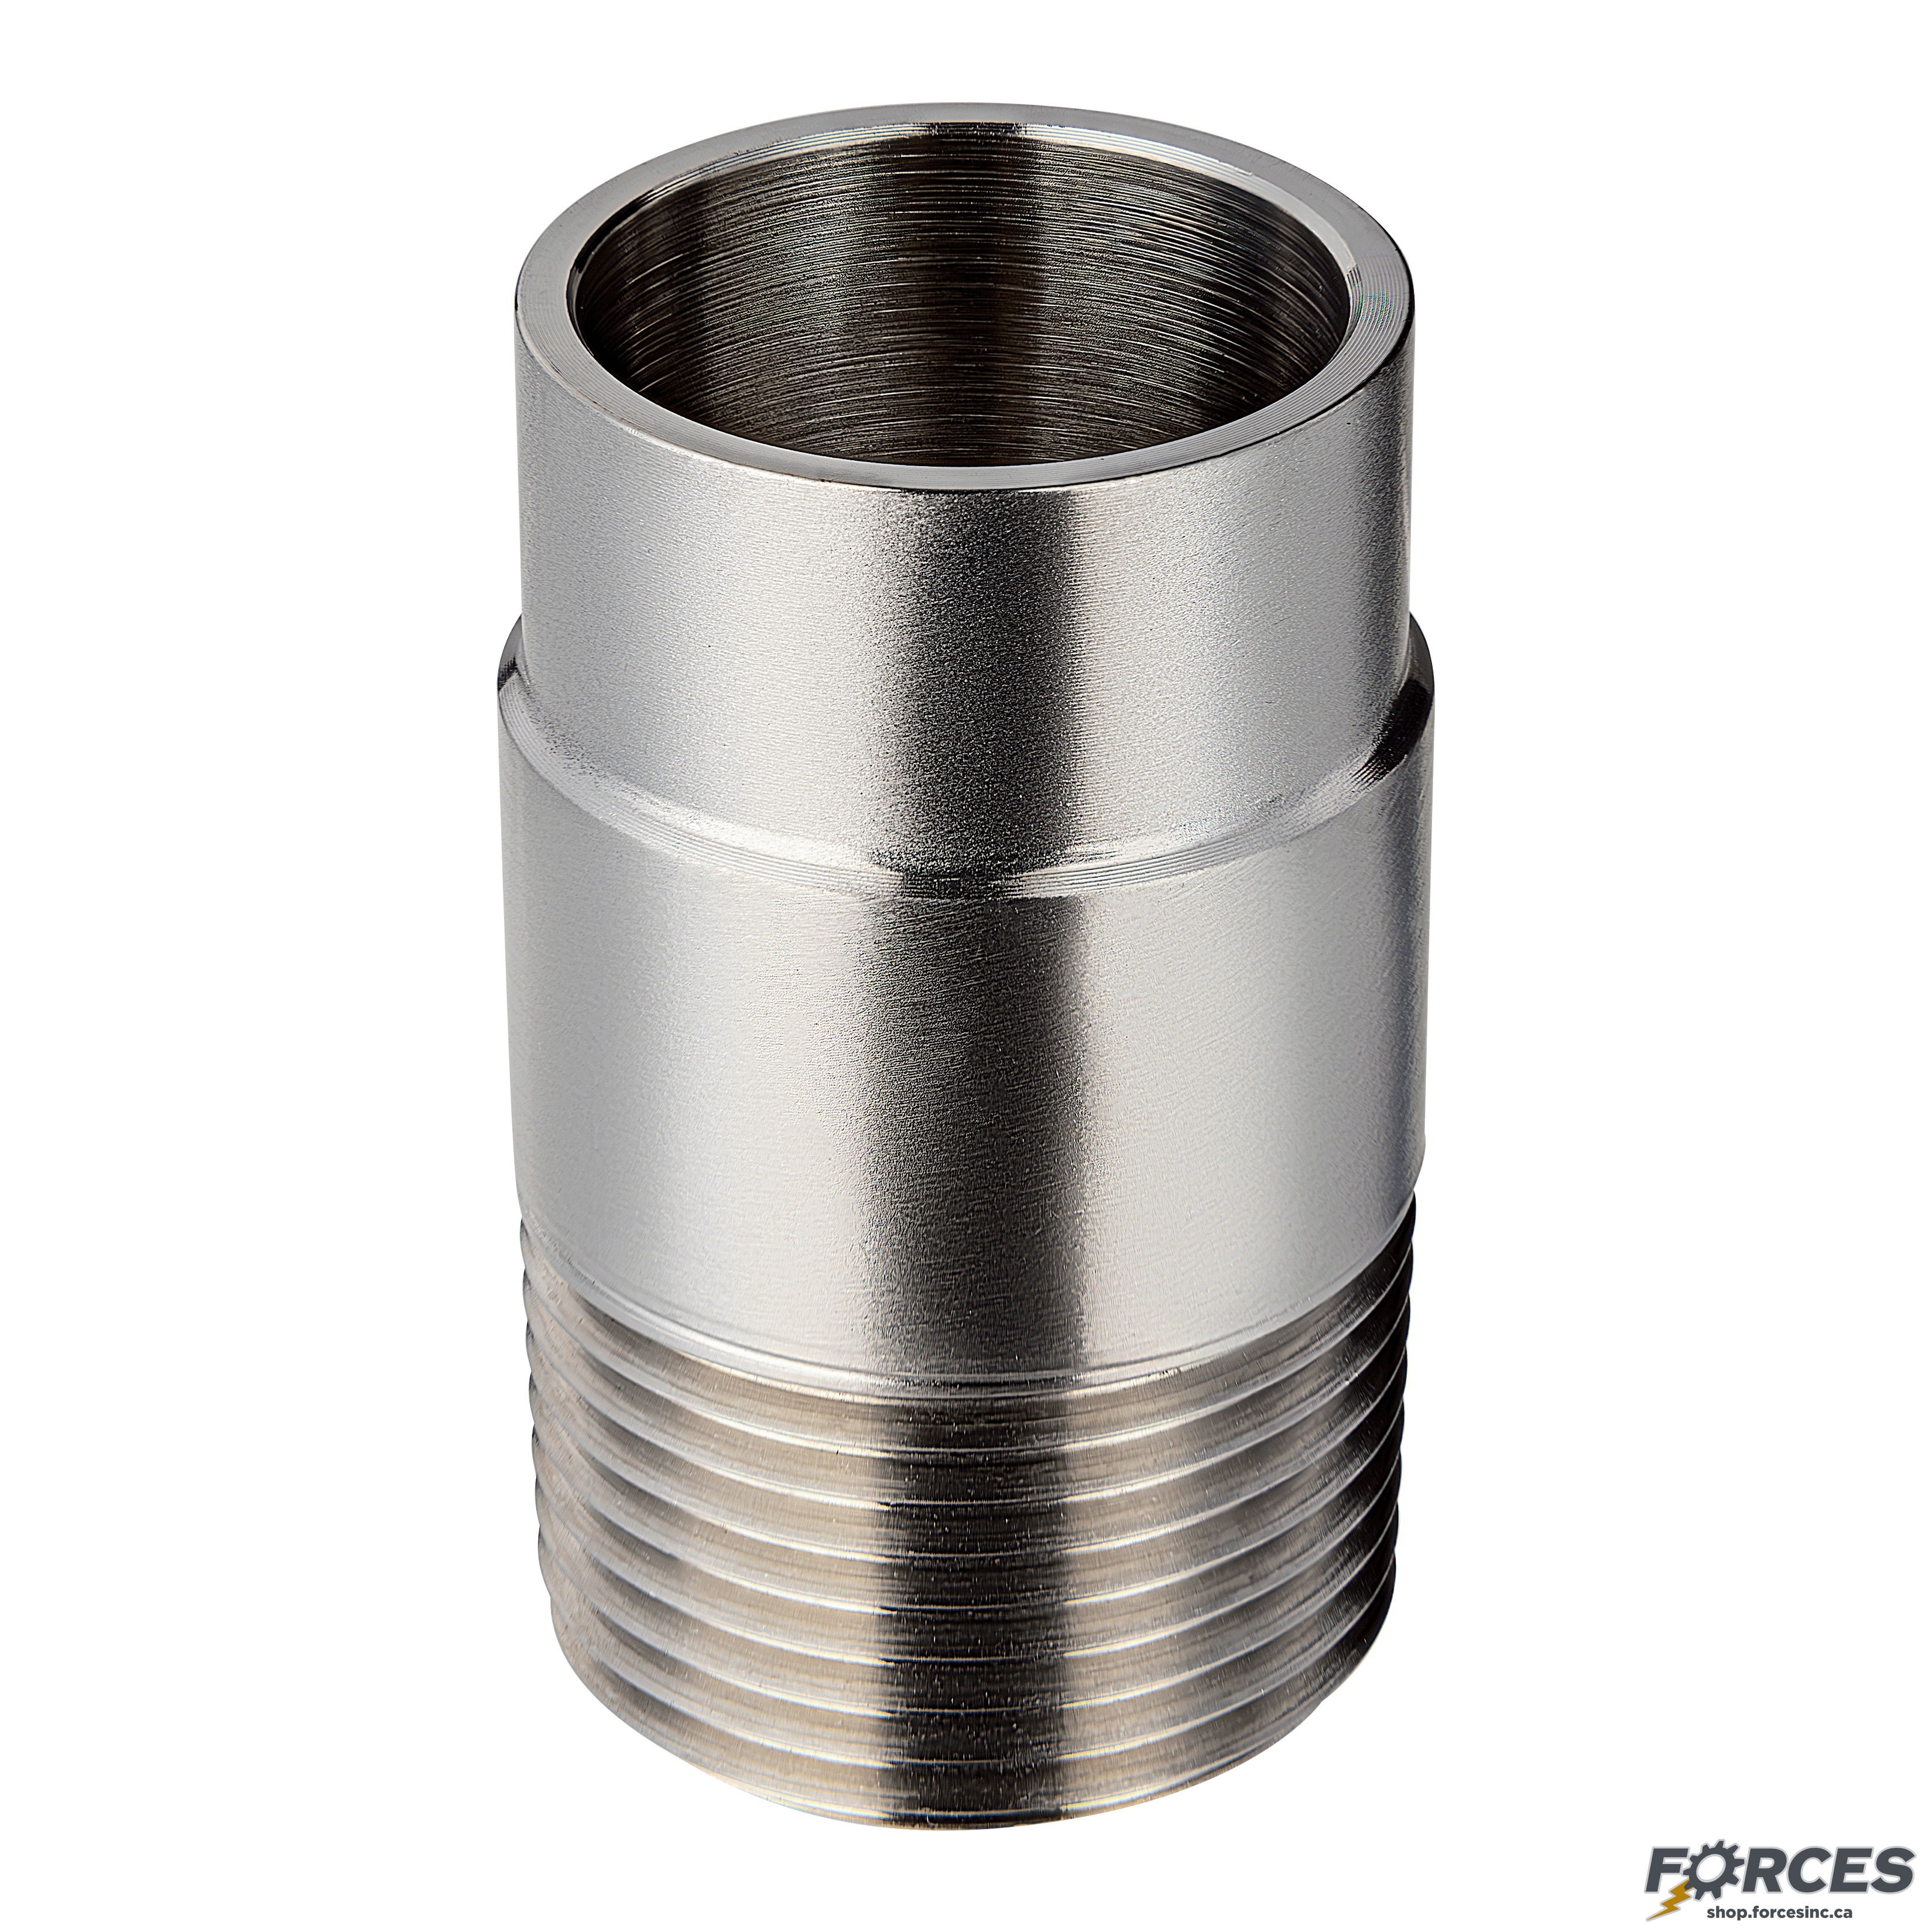 1-1/2" x 1" Butt Weld x Male NPT Adapter - Stainless Steel 316 - Forces Inc